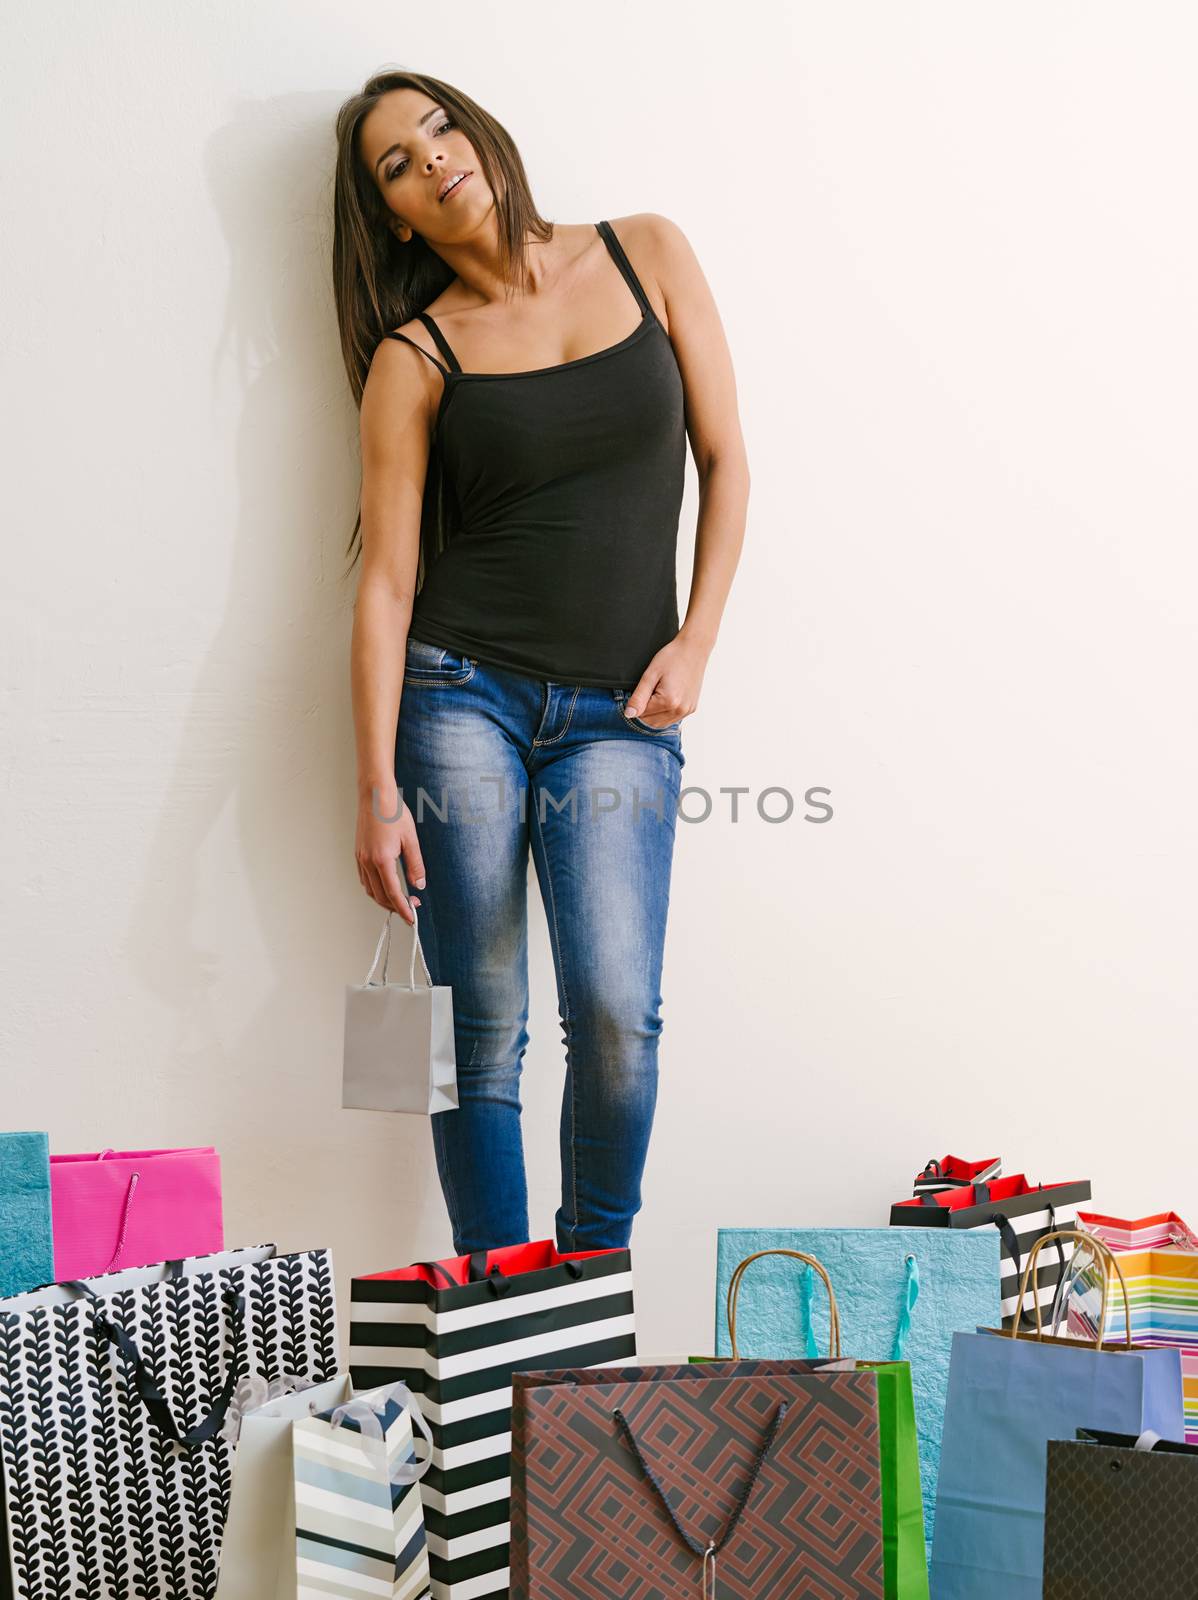 Photo of a tired young woman standing around all her shopping bags.